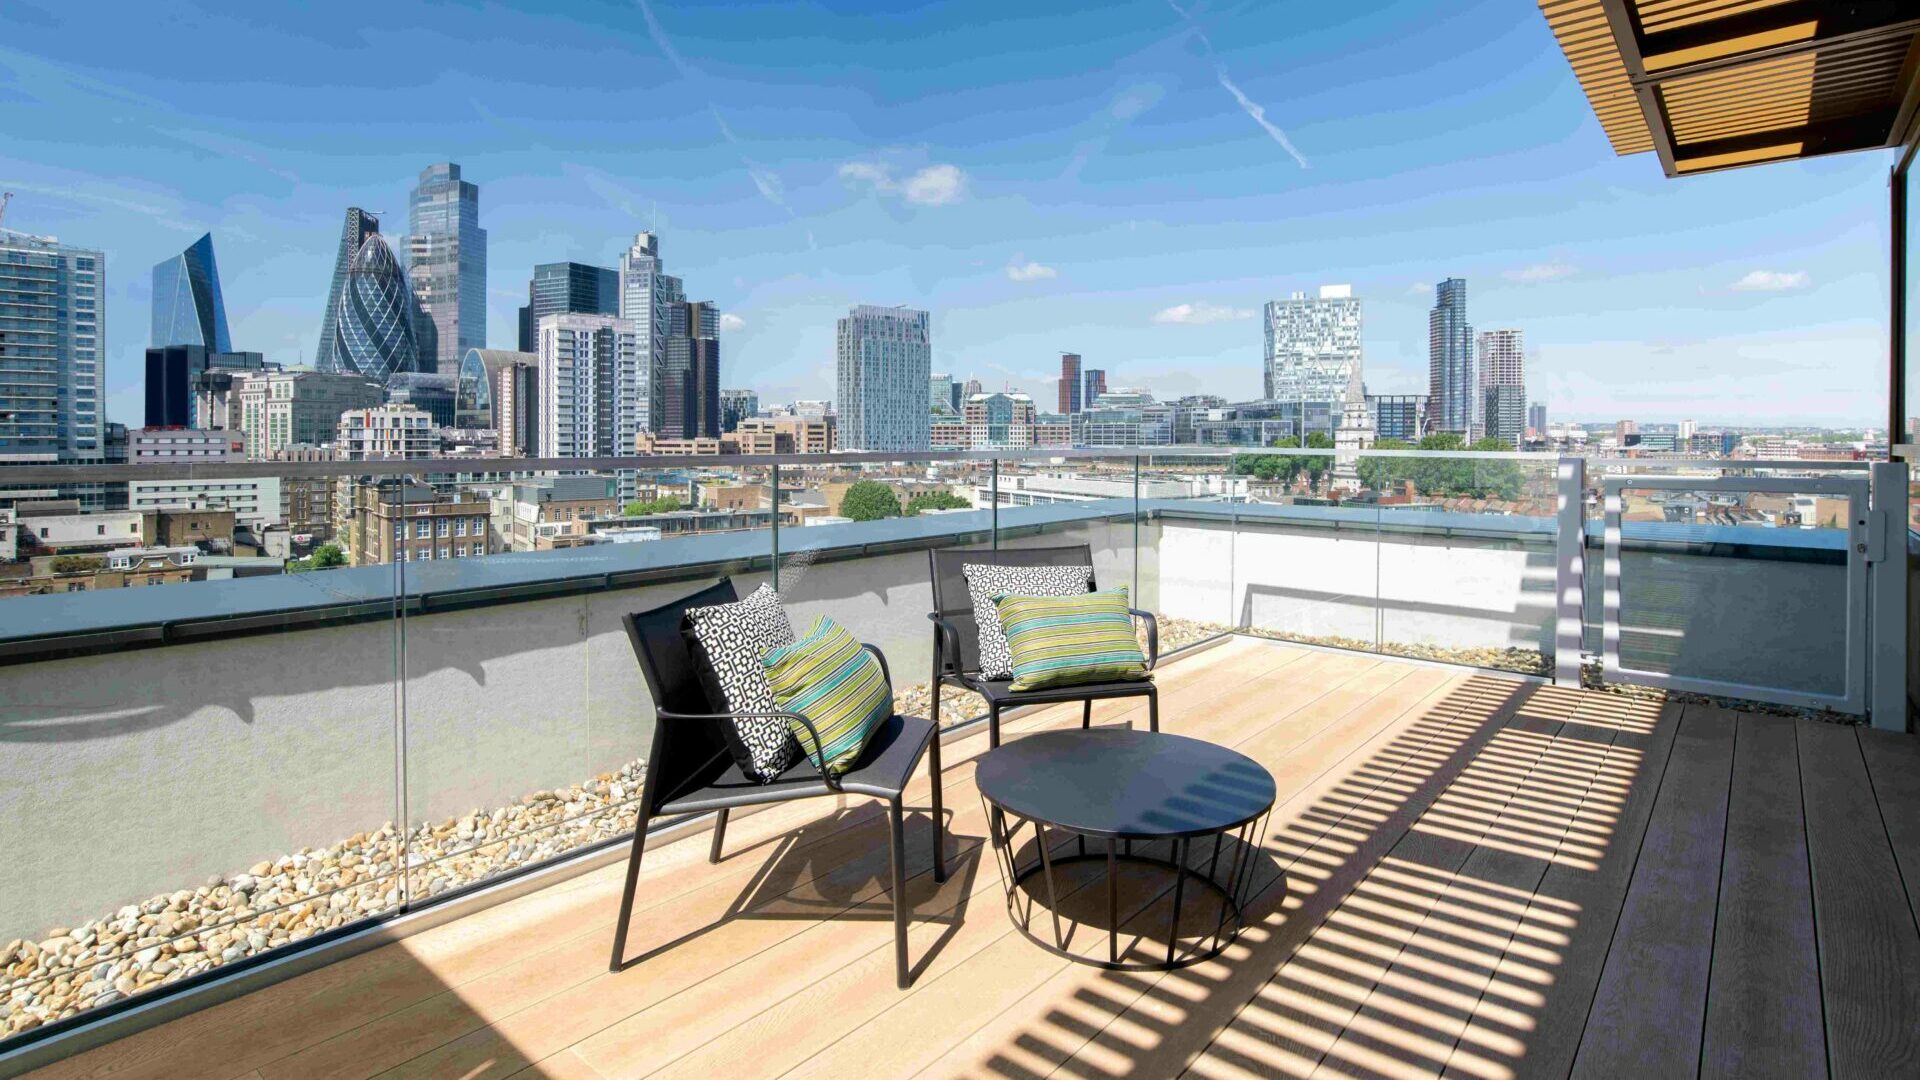 Hotel terrace with a view of the City of London skyline